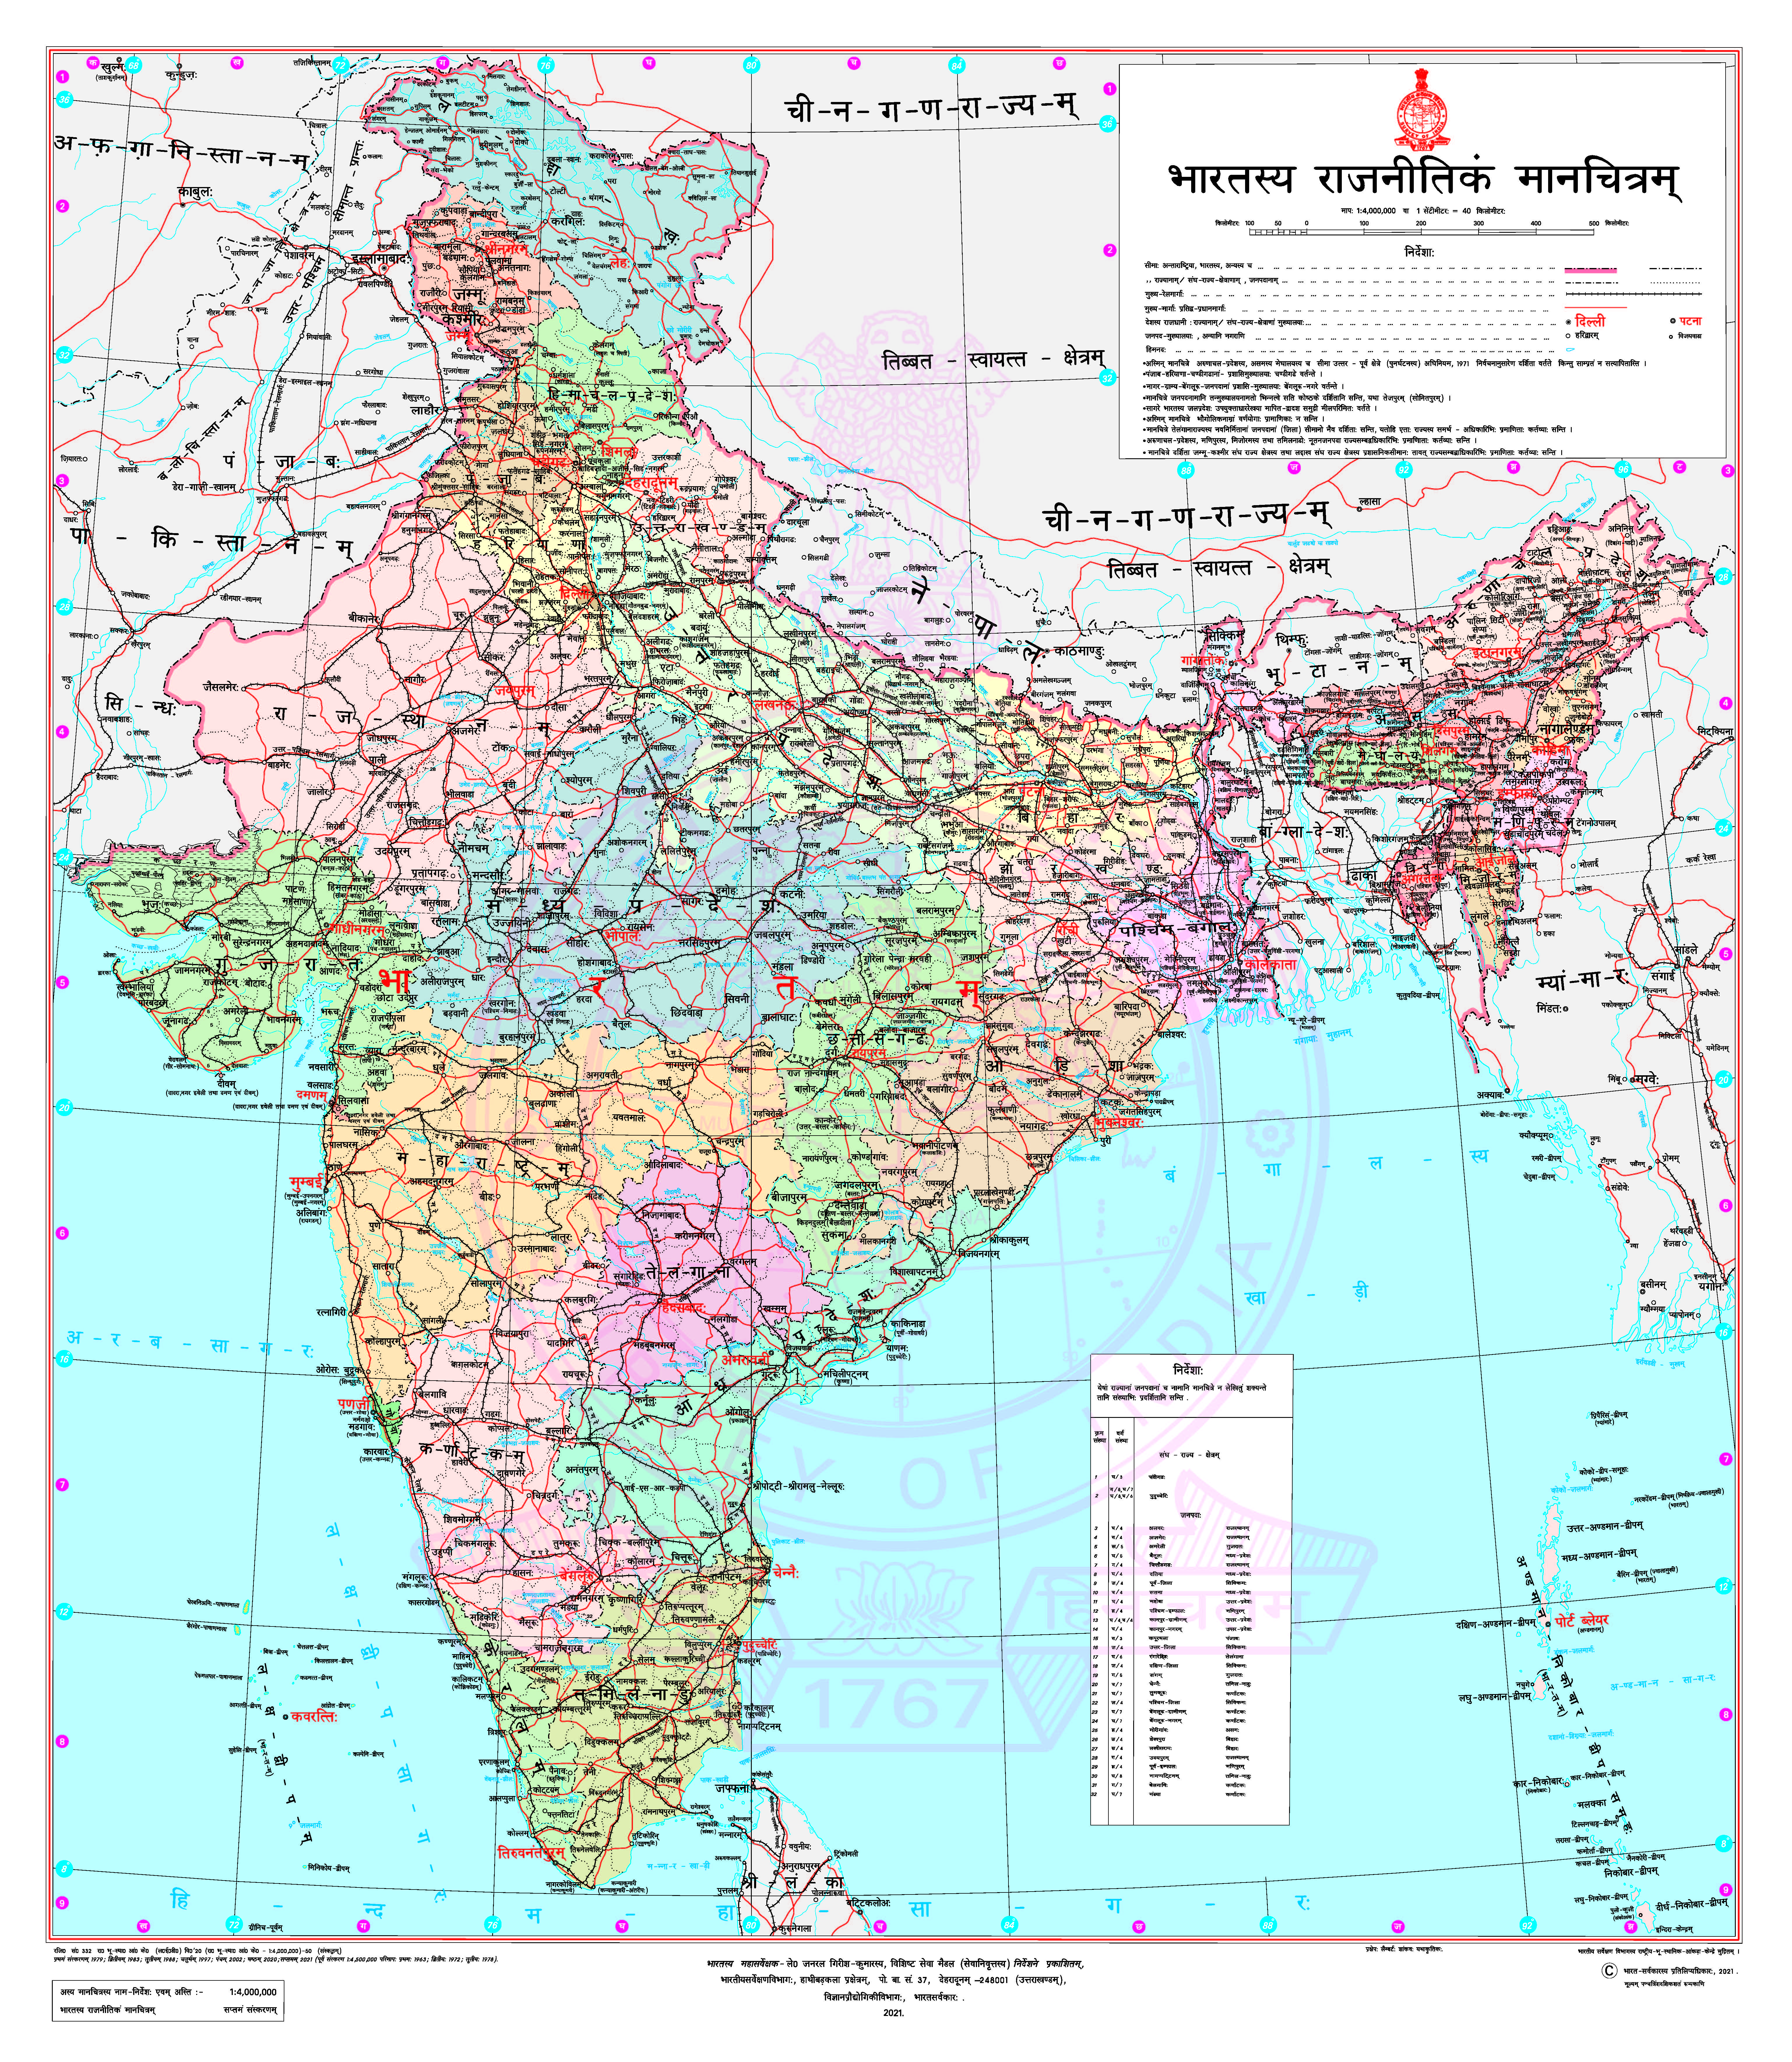 Political Map Of India